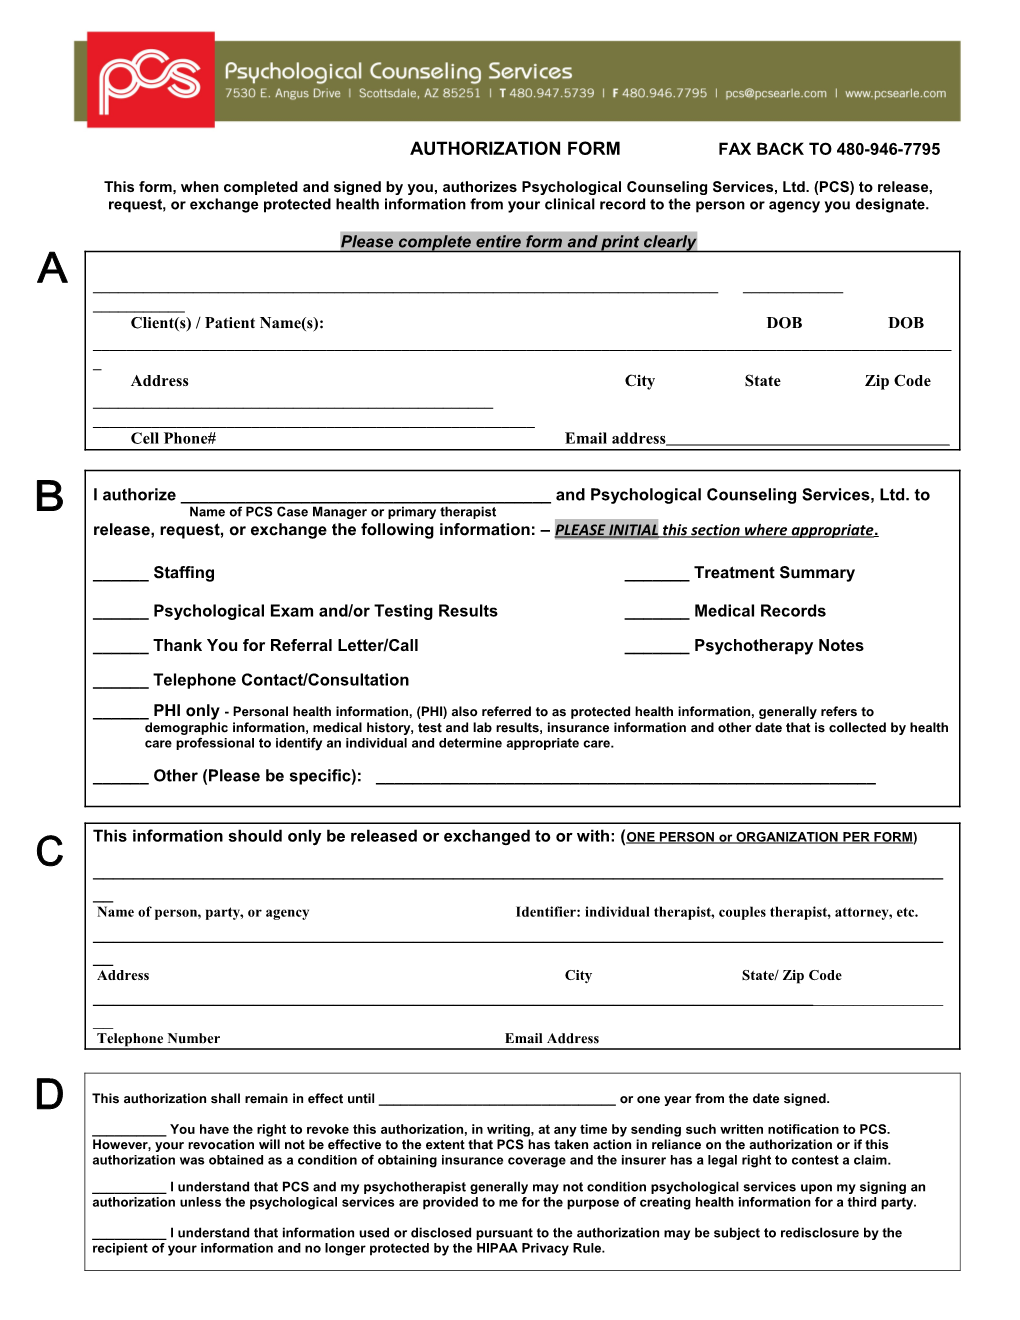 Please Complete Entire Form and Print Clearly